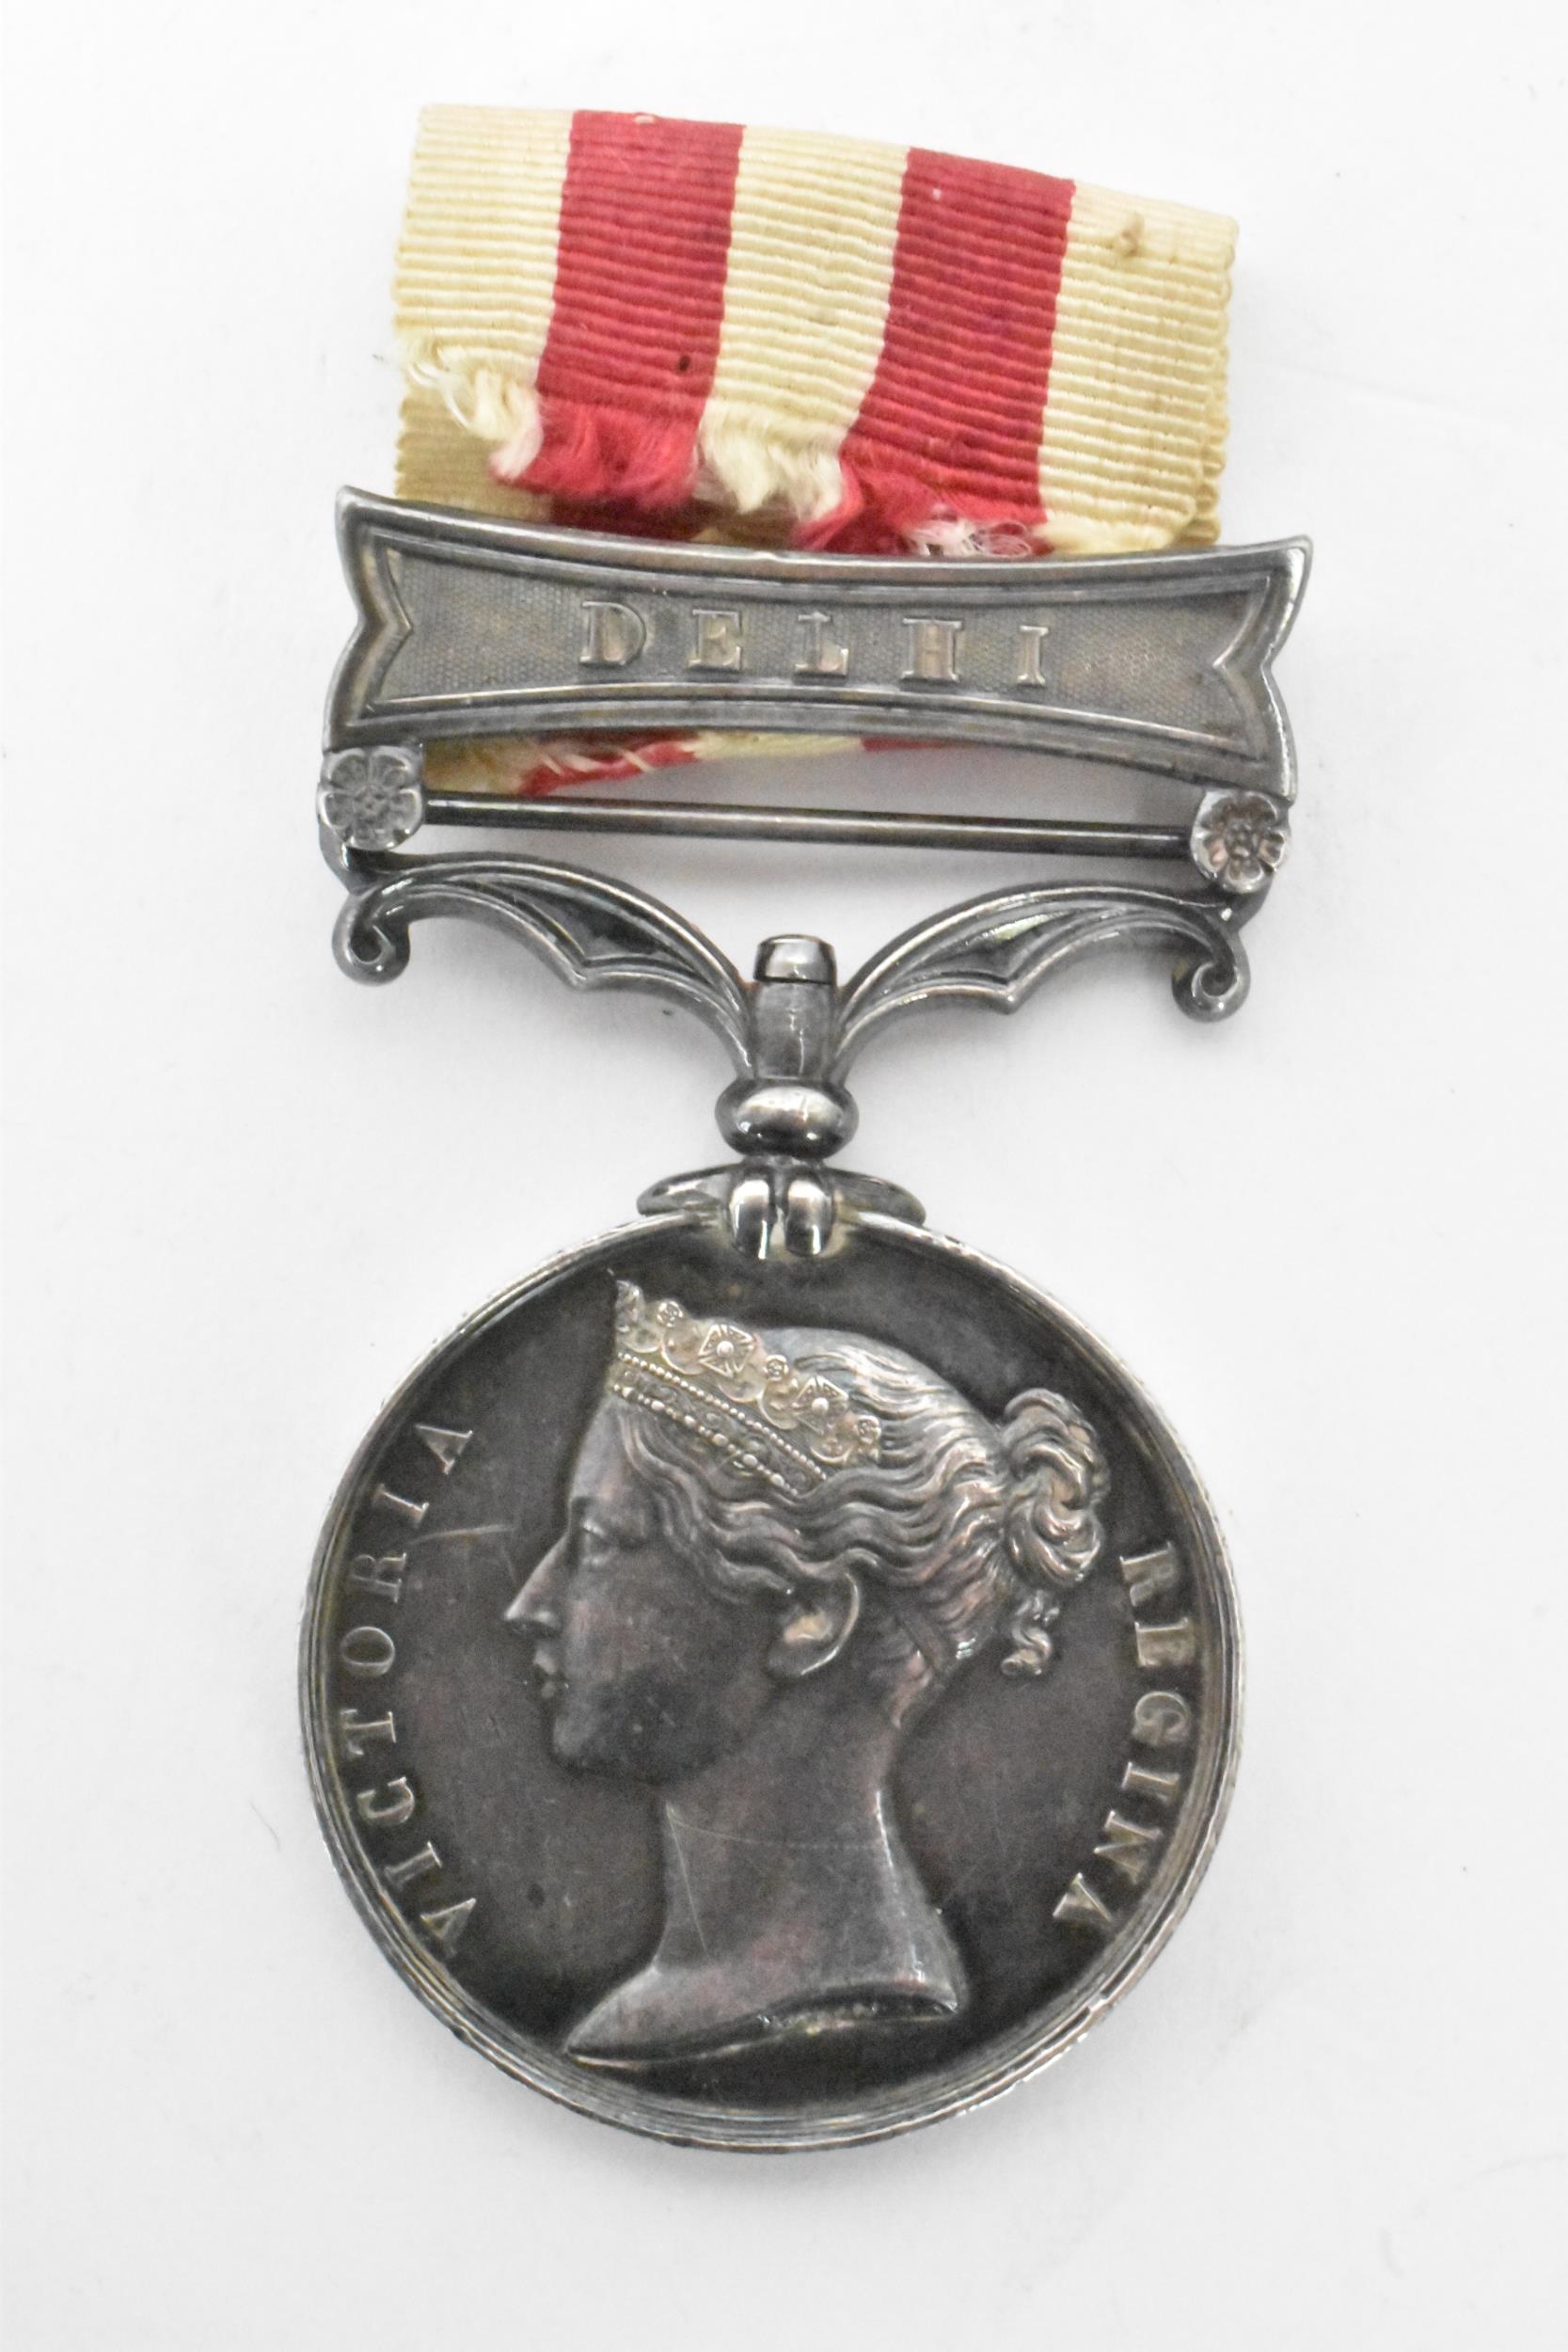 A Victorian Indian mutiny medal, 1857-58, with Delhi clasp, awarded to CORPL D,DIX 61ST REGT